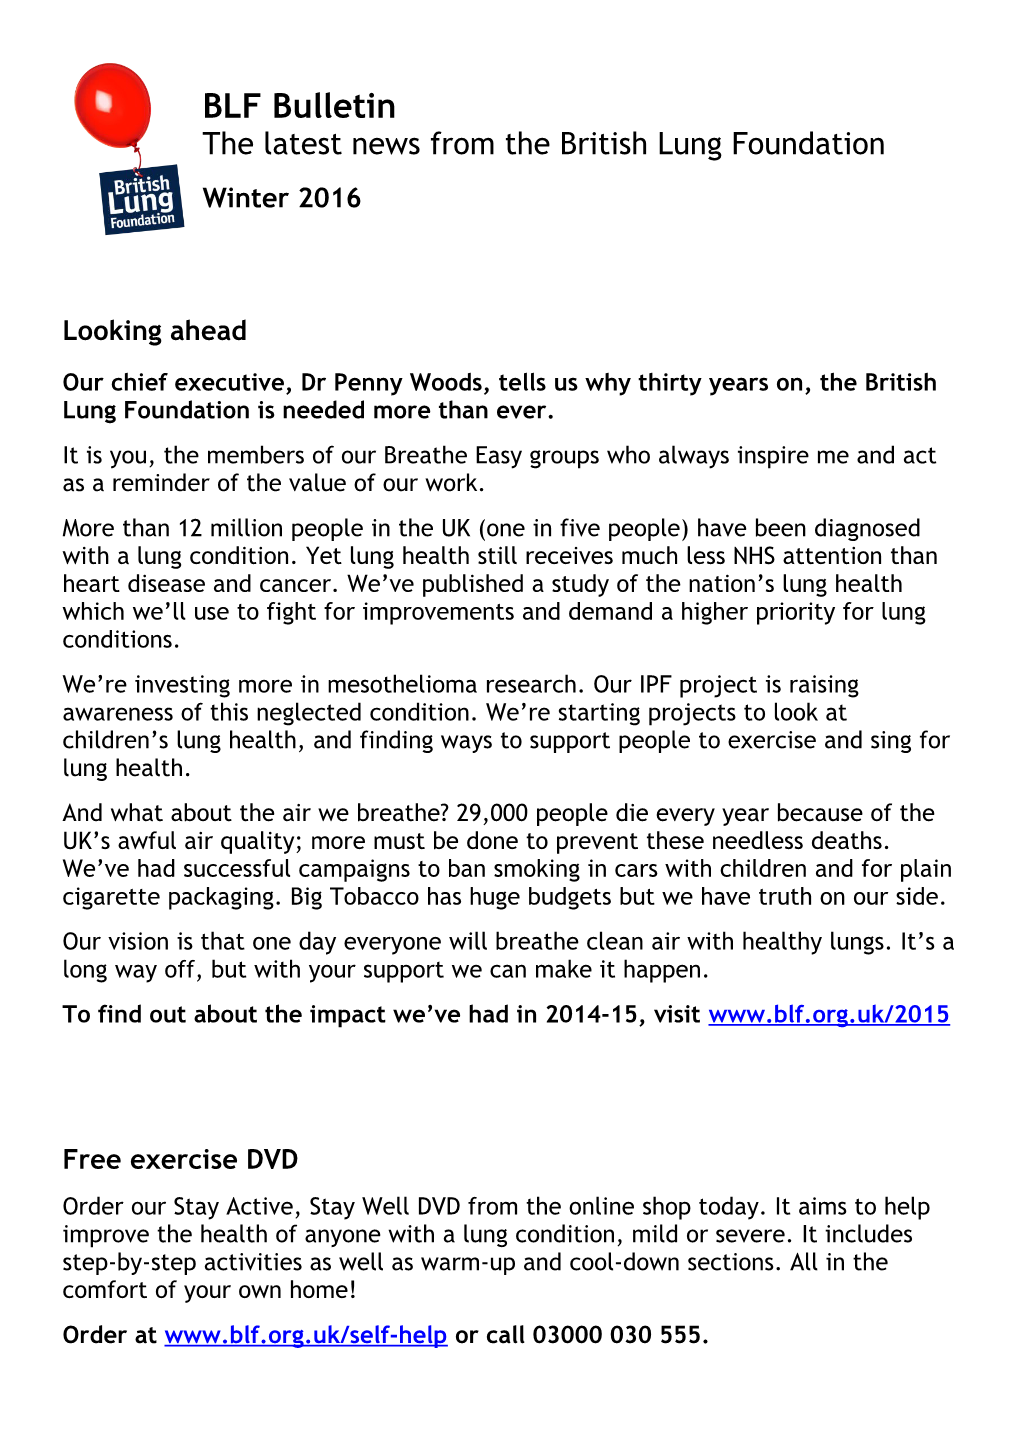 The Latest News from the British Lung Foundation